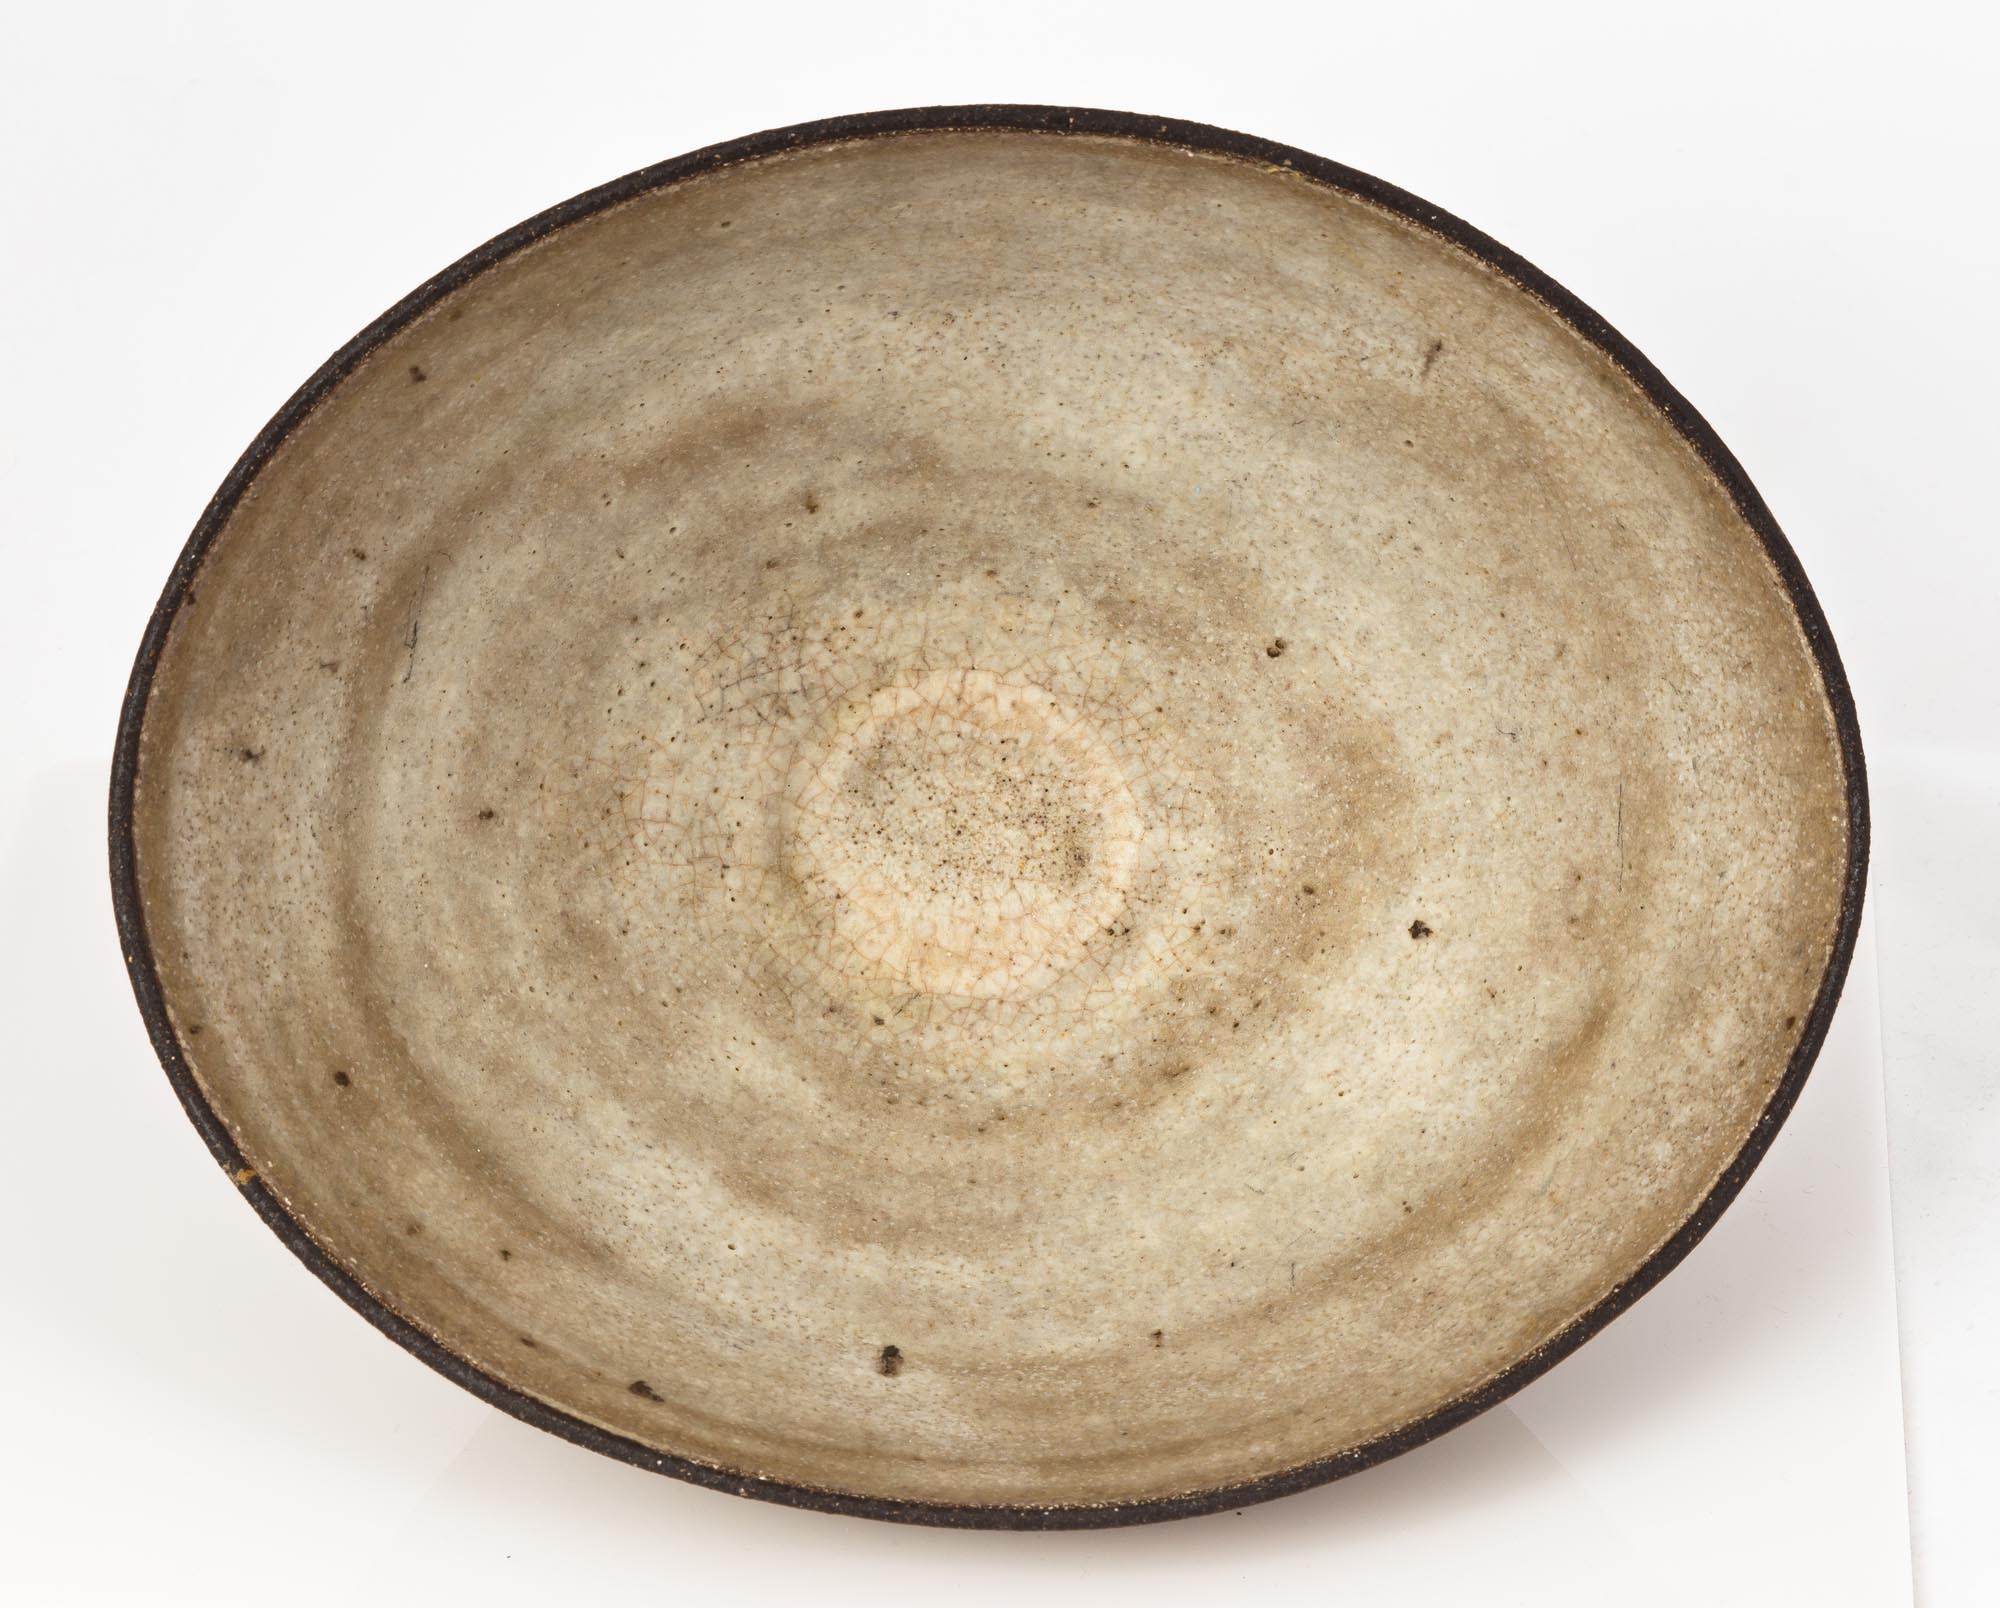 Lucie Rie (British, 1902-1995) Large Oval Bowl. 20th century. Porcelain, Impressed with artist's - Image 3 of 4